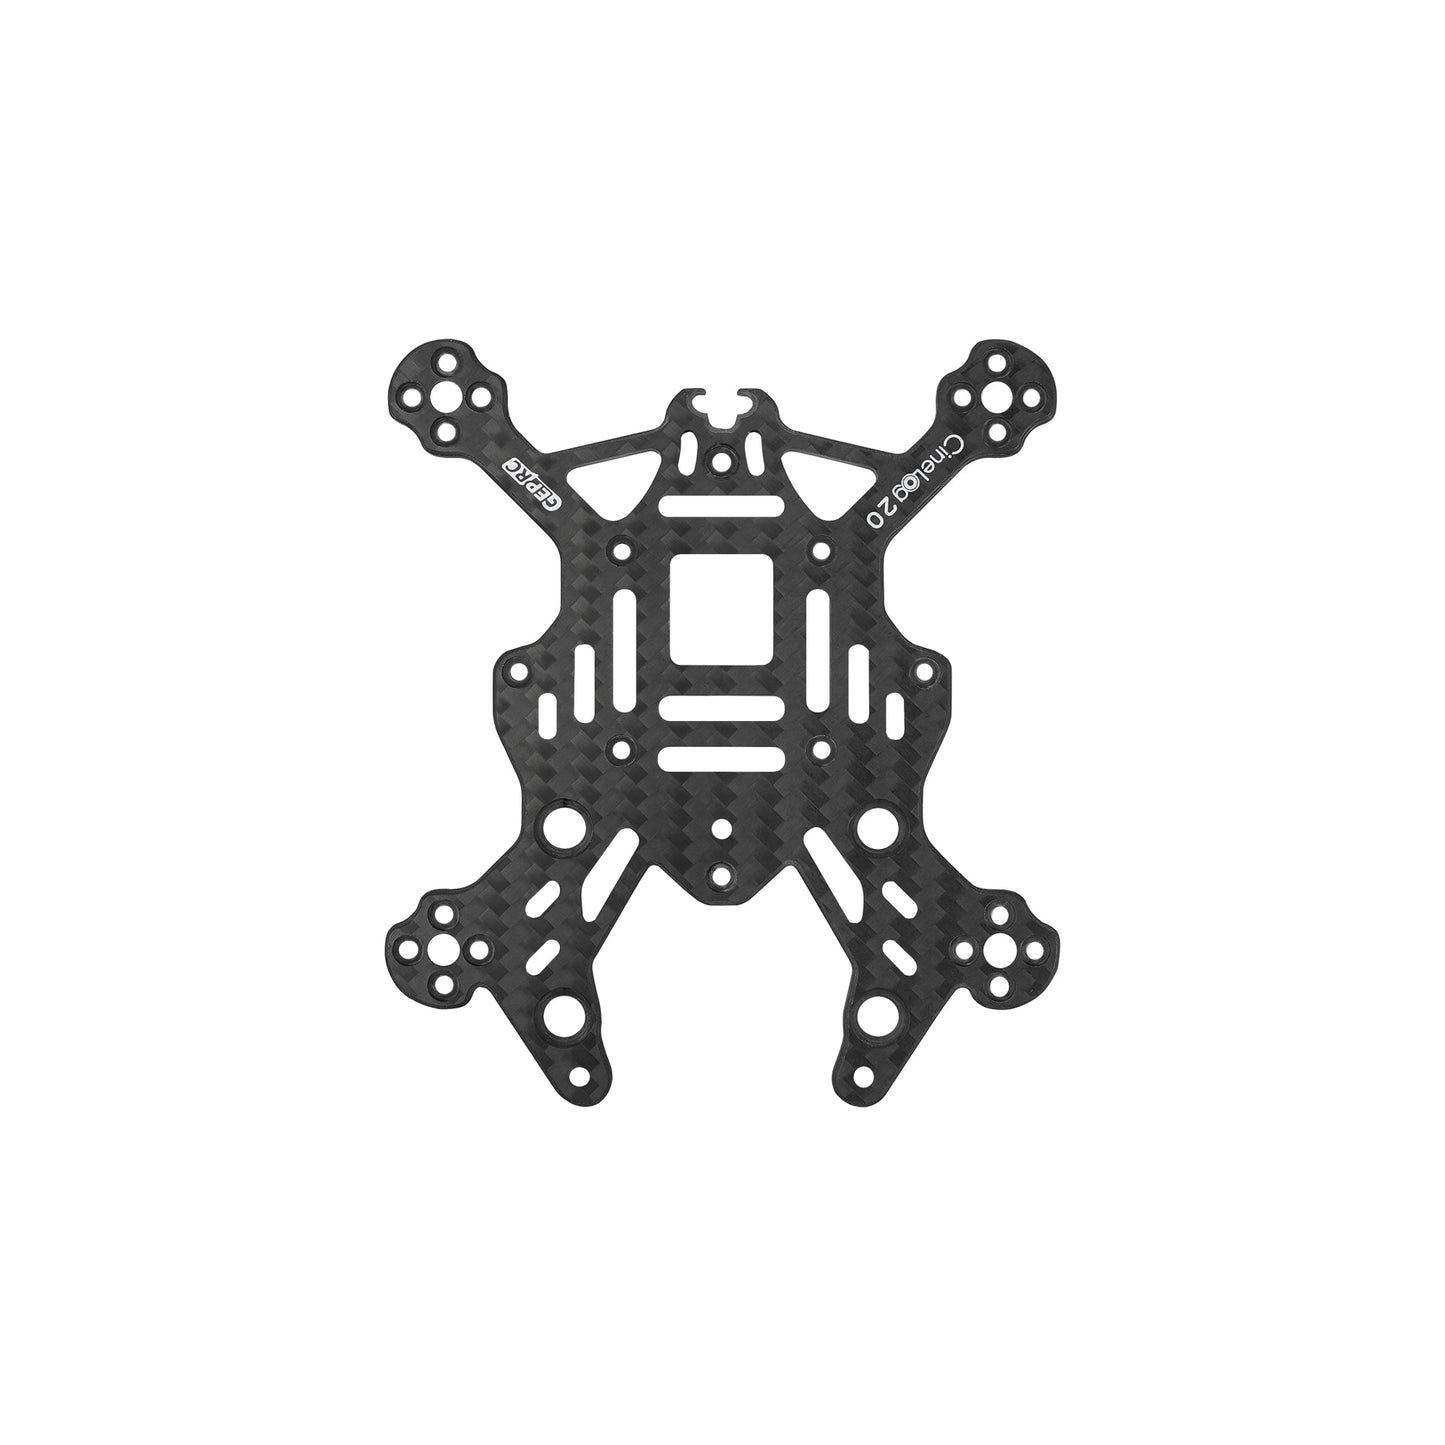 GEPRC GEP-CL20 Frame - Parts Suitable for CineLog20 Series Drone DIY RC FPV Quadcopter Series Drone Replacement Accessories Parts